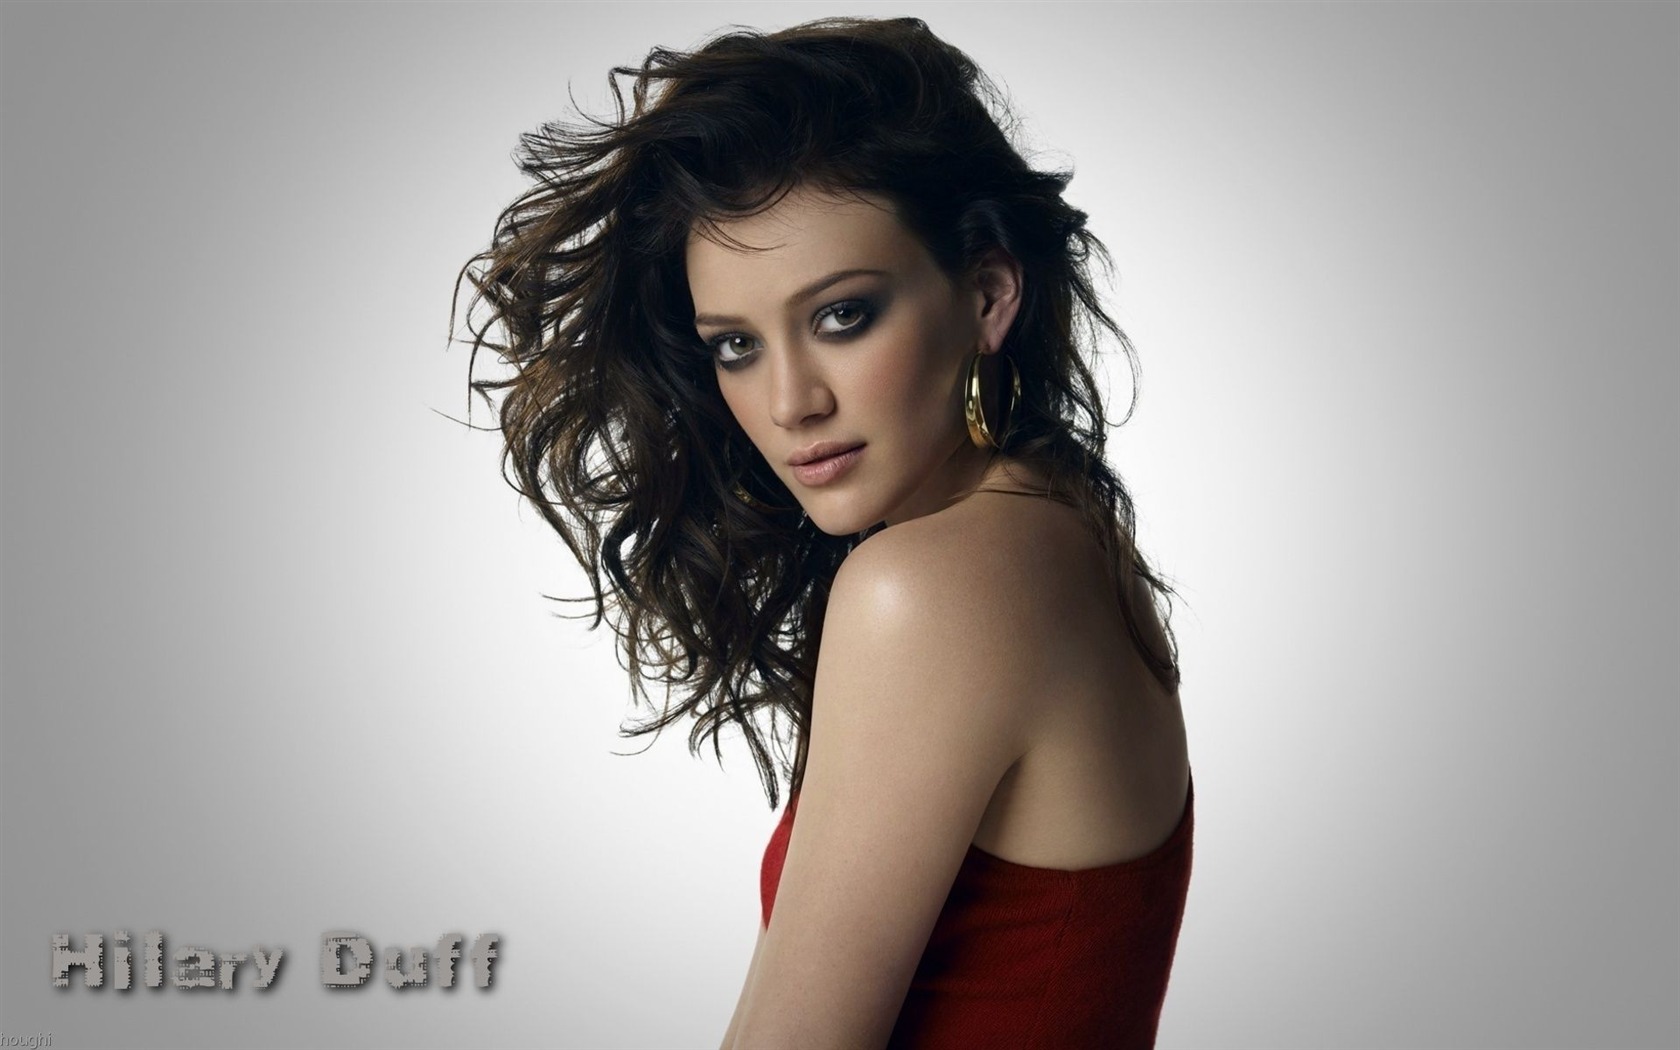 Hilary Duff #037 - 1680x1050 Wallpapers Pictures Photos Images